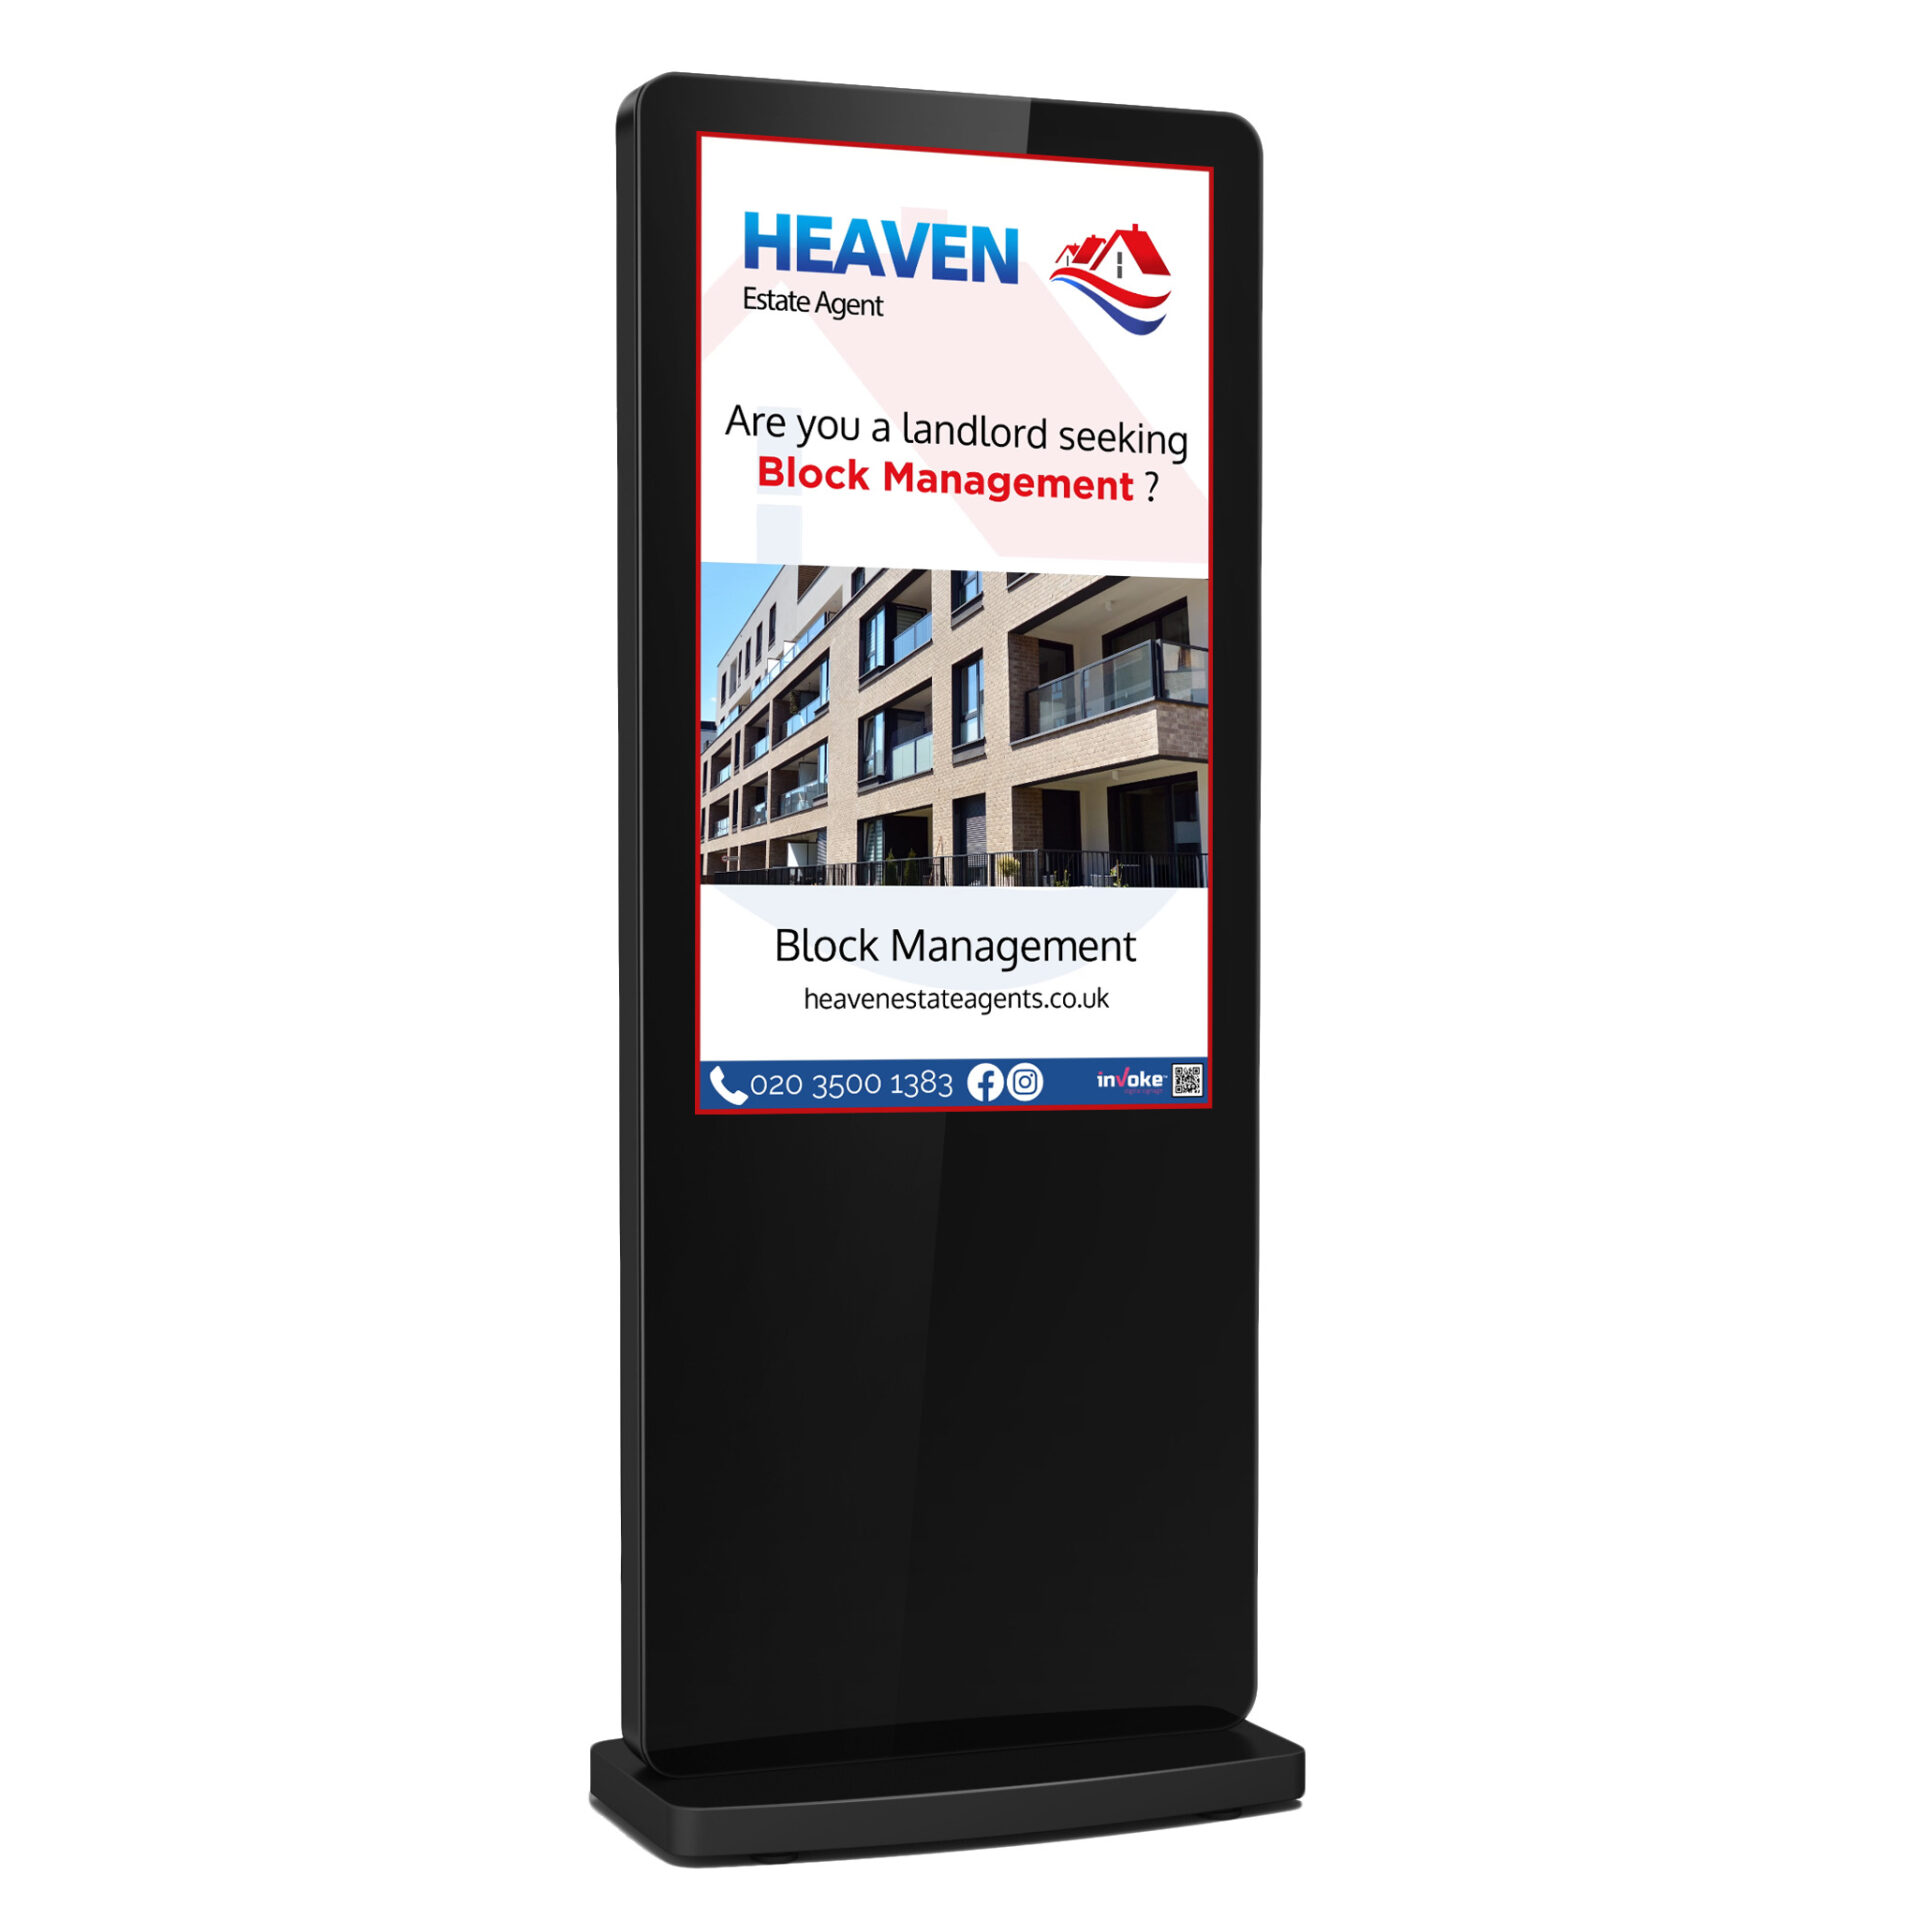 heaven estate agents using a free standing board to advertise their block management service